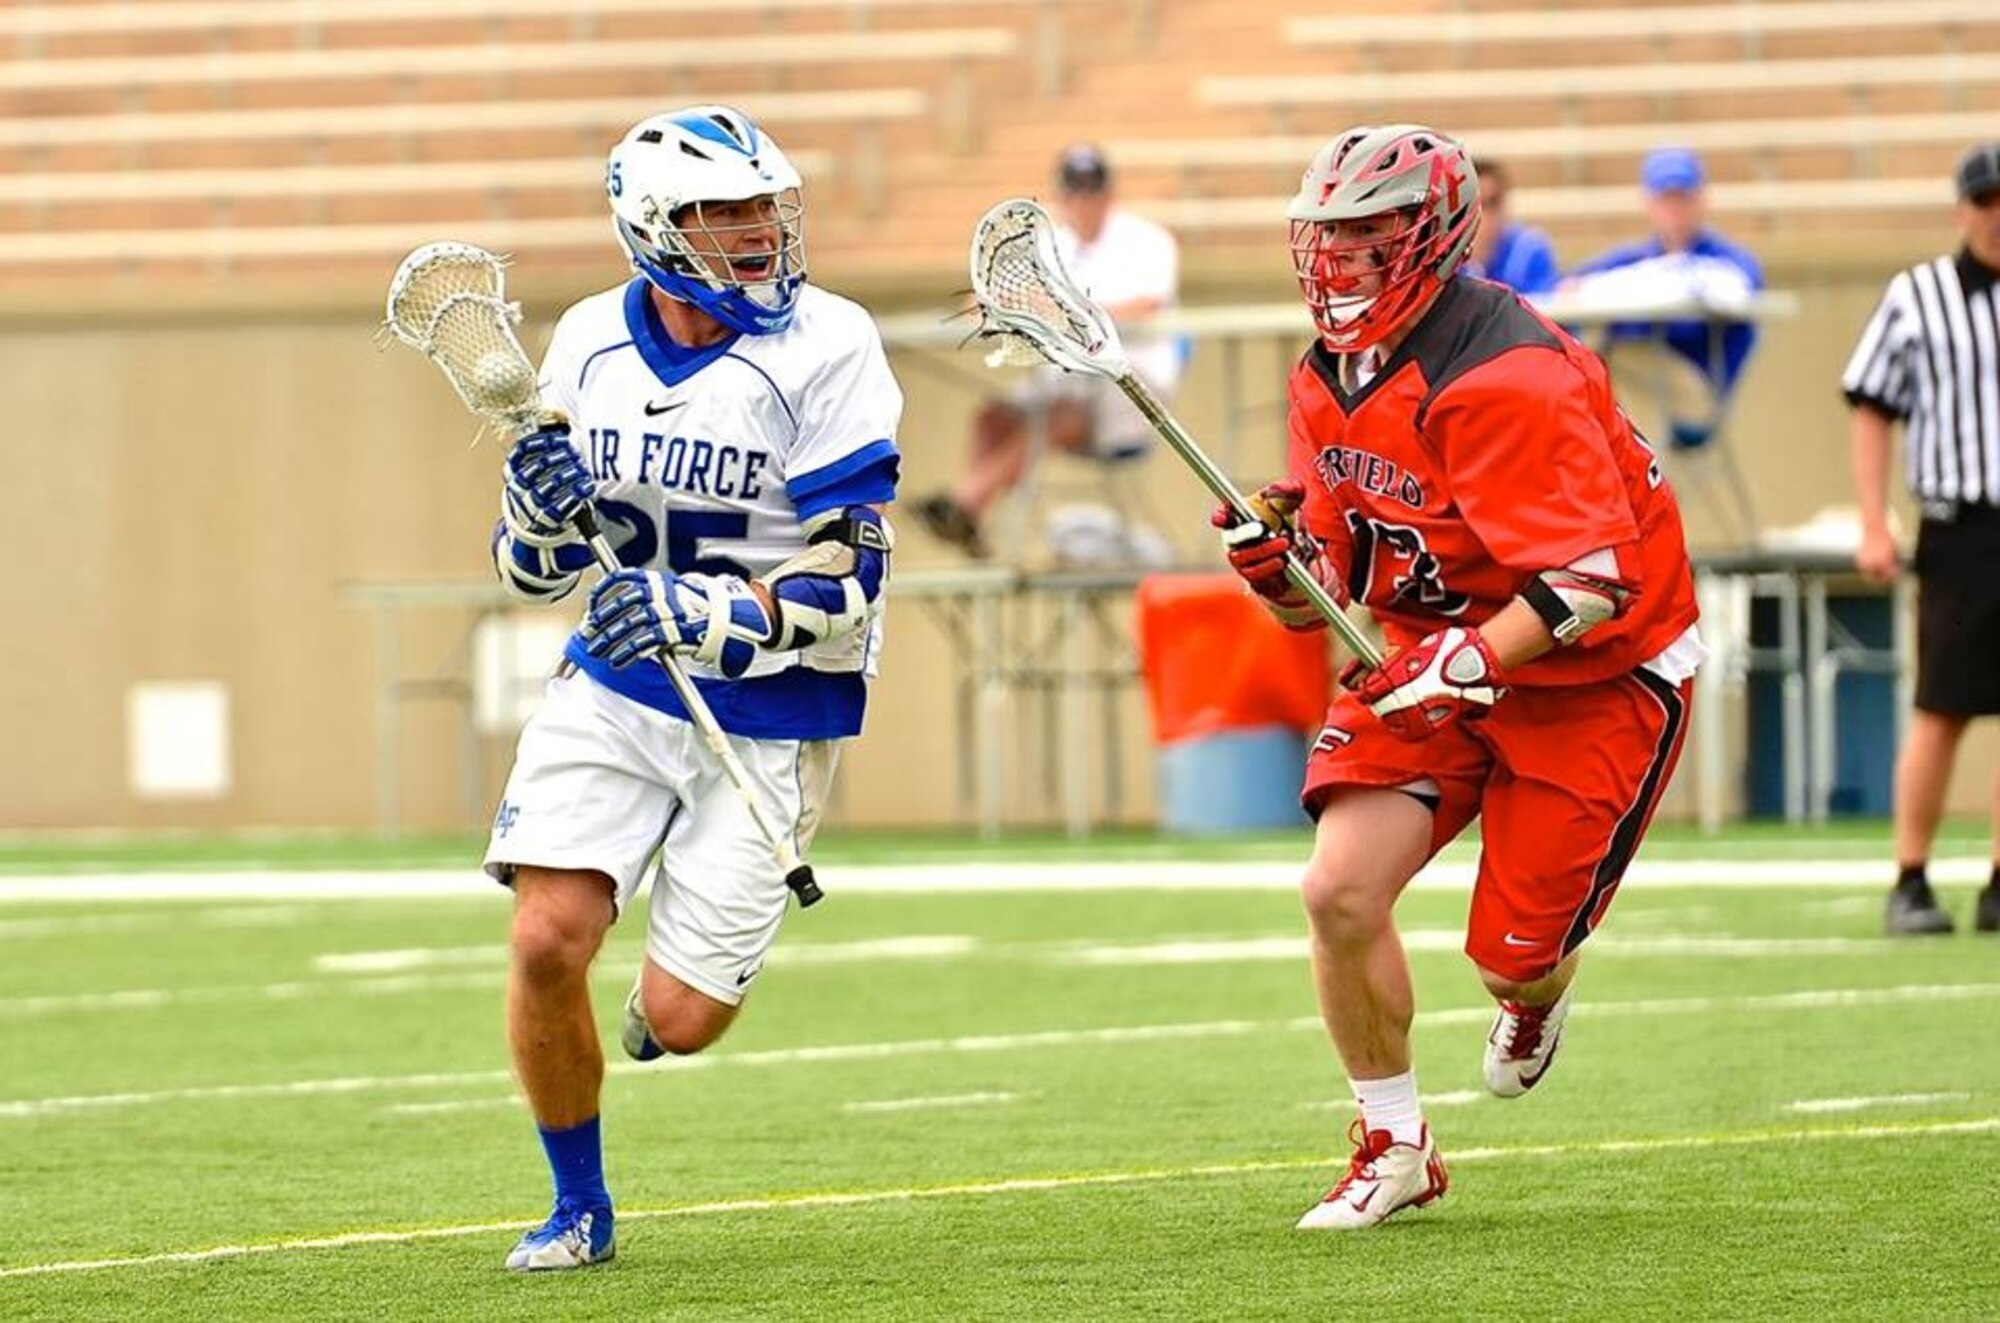 U.S. Air Force Academy Falcons Cadet Eric Smith drives the ball past a Fairfield University player during a game at the Academy that the Falcons won 16-8, April 12, 2014. During the game, Smith had two goals, three assists and a team-high six ground balls, (Courtesy photo)